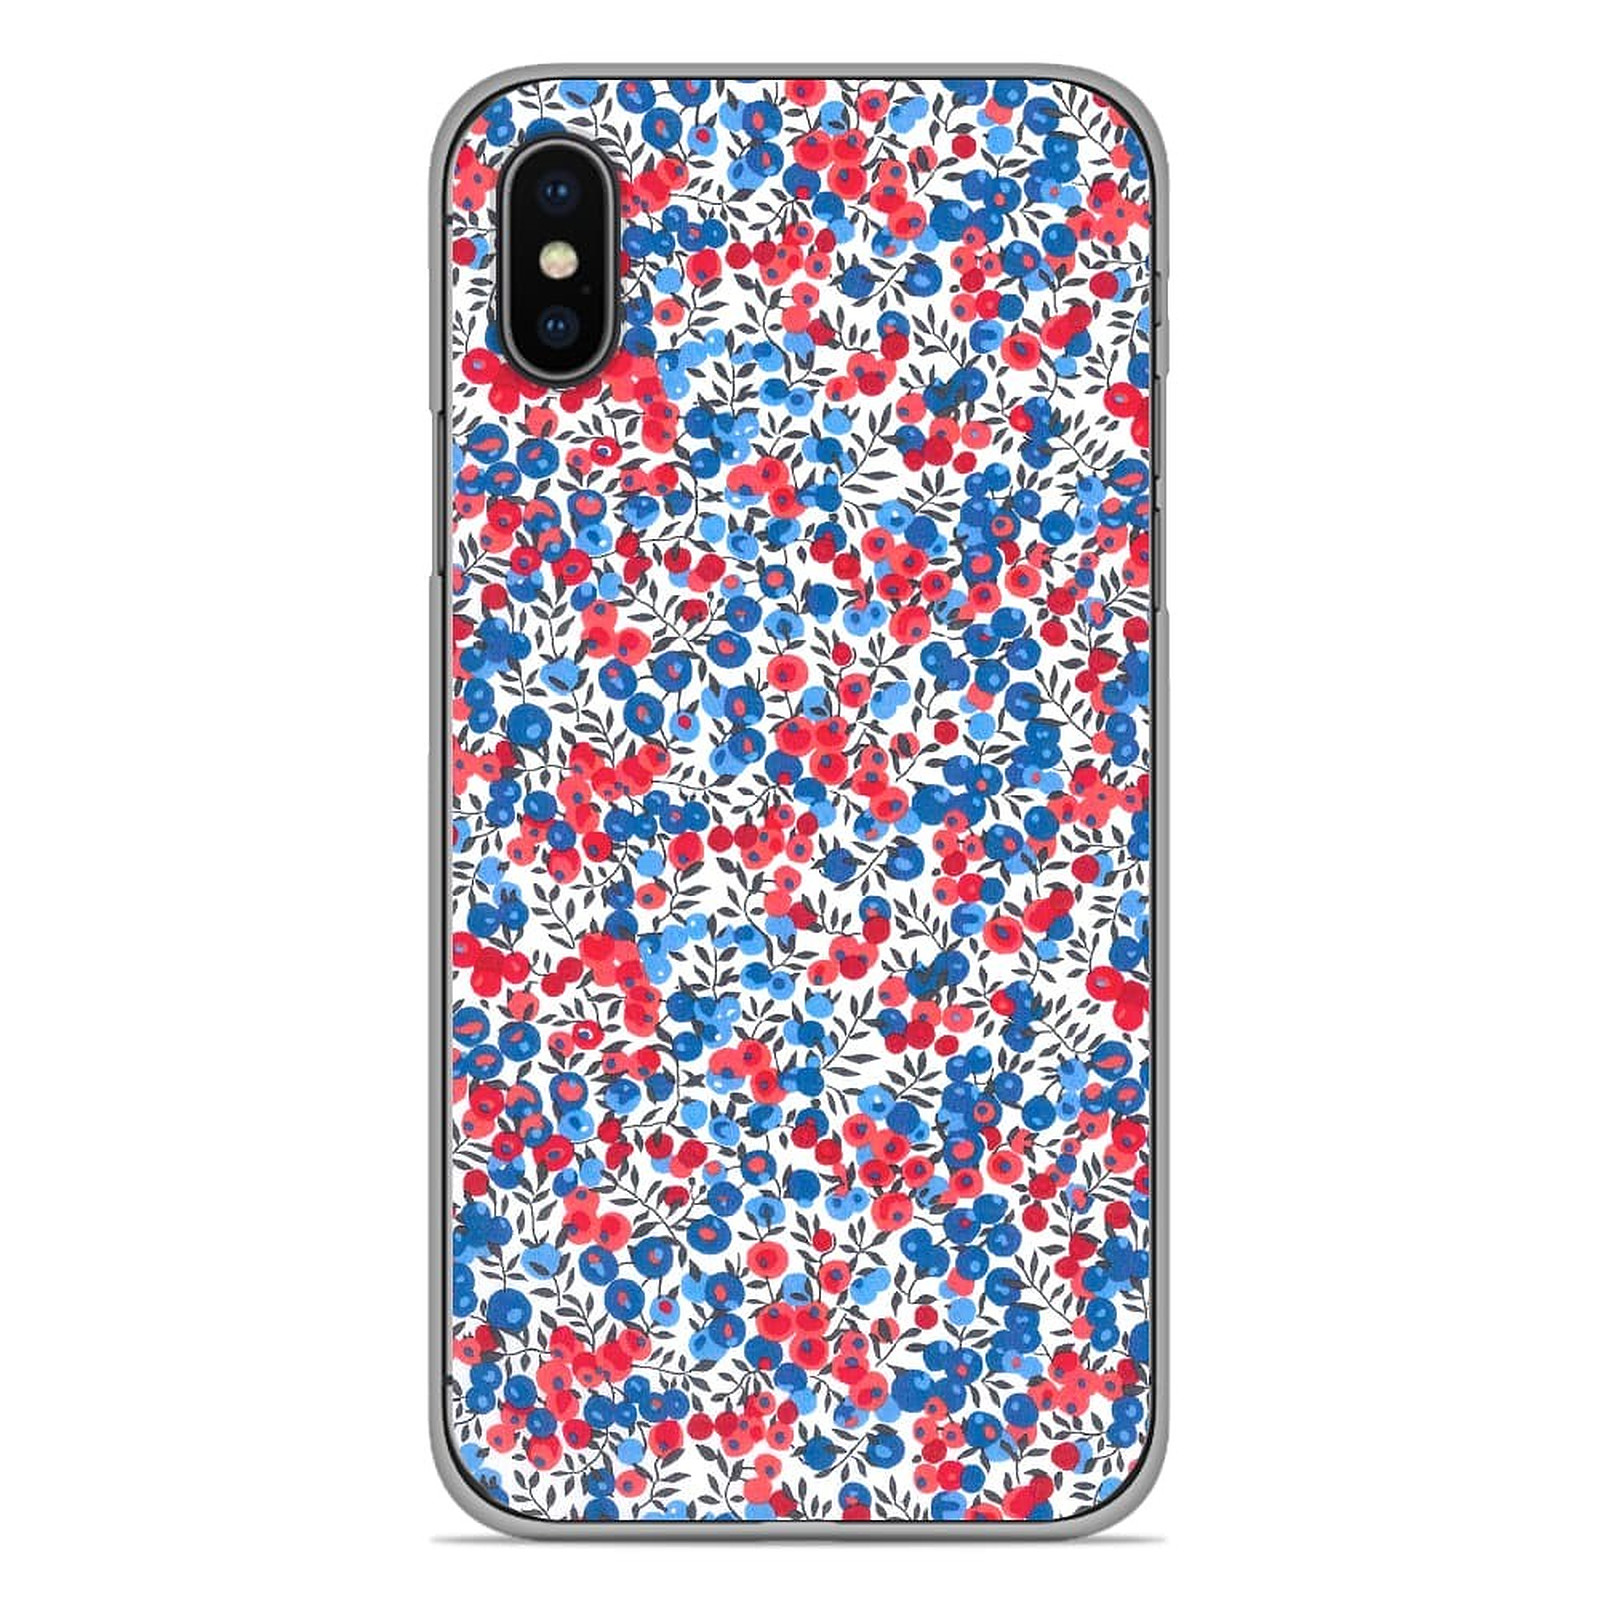 1001 Coques Coque silicone gel Apple iPhone X / XS motif Liberty Wiltshire Bleu - Coque telephone 1001Coques